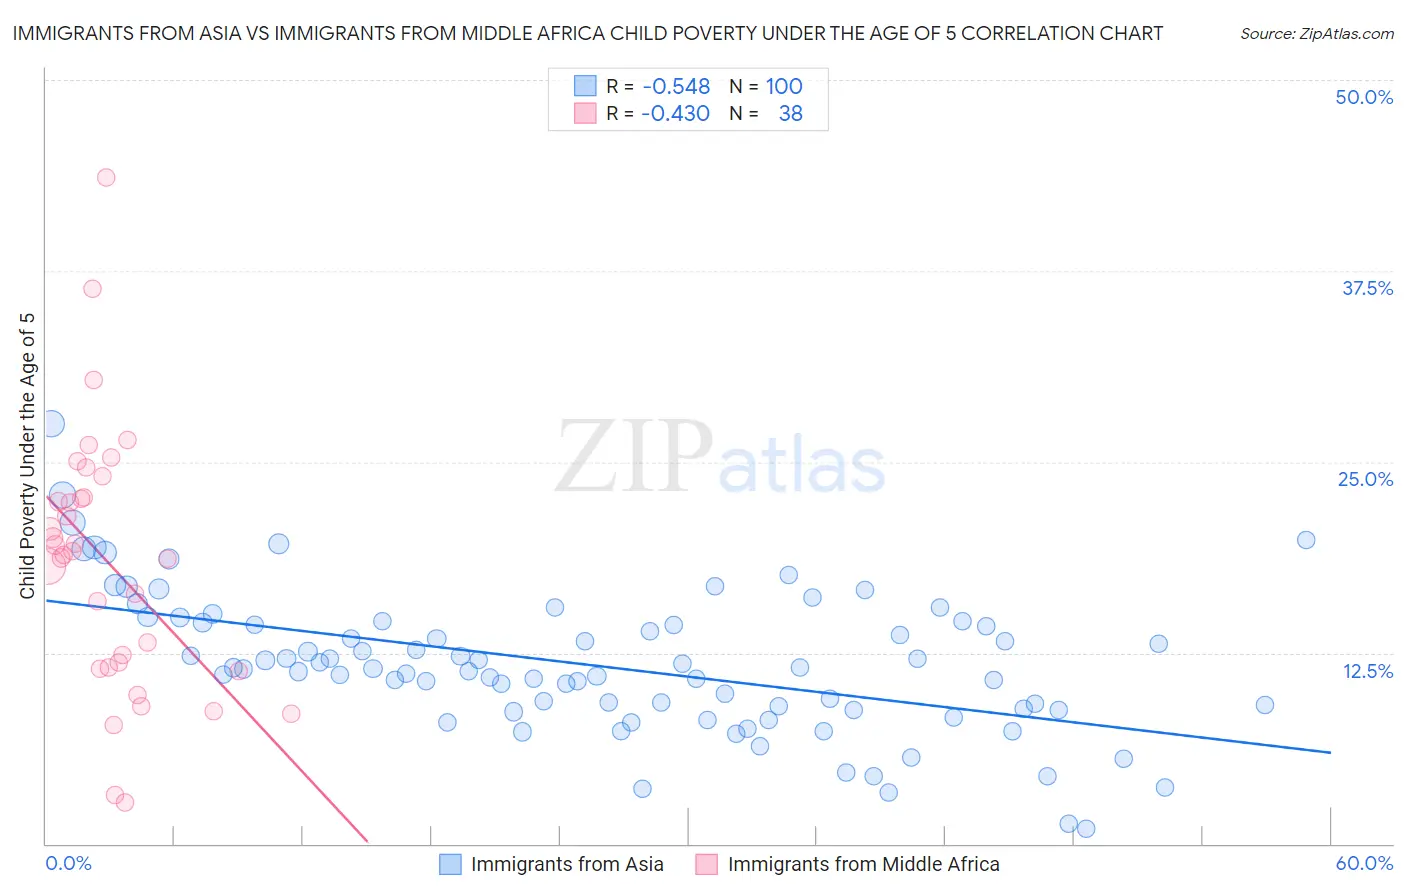 Immigrants from Asia vs Immigrants from Middle Africa Child Poverty Under the Age of 5